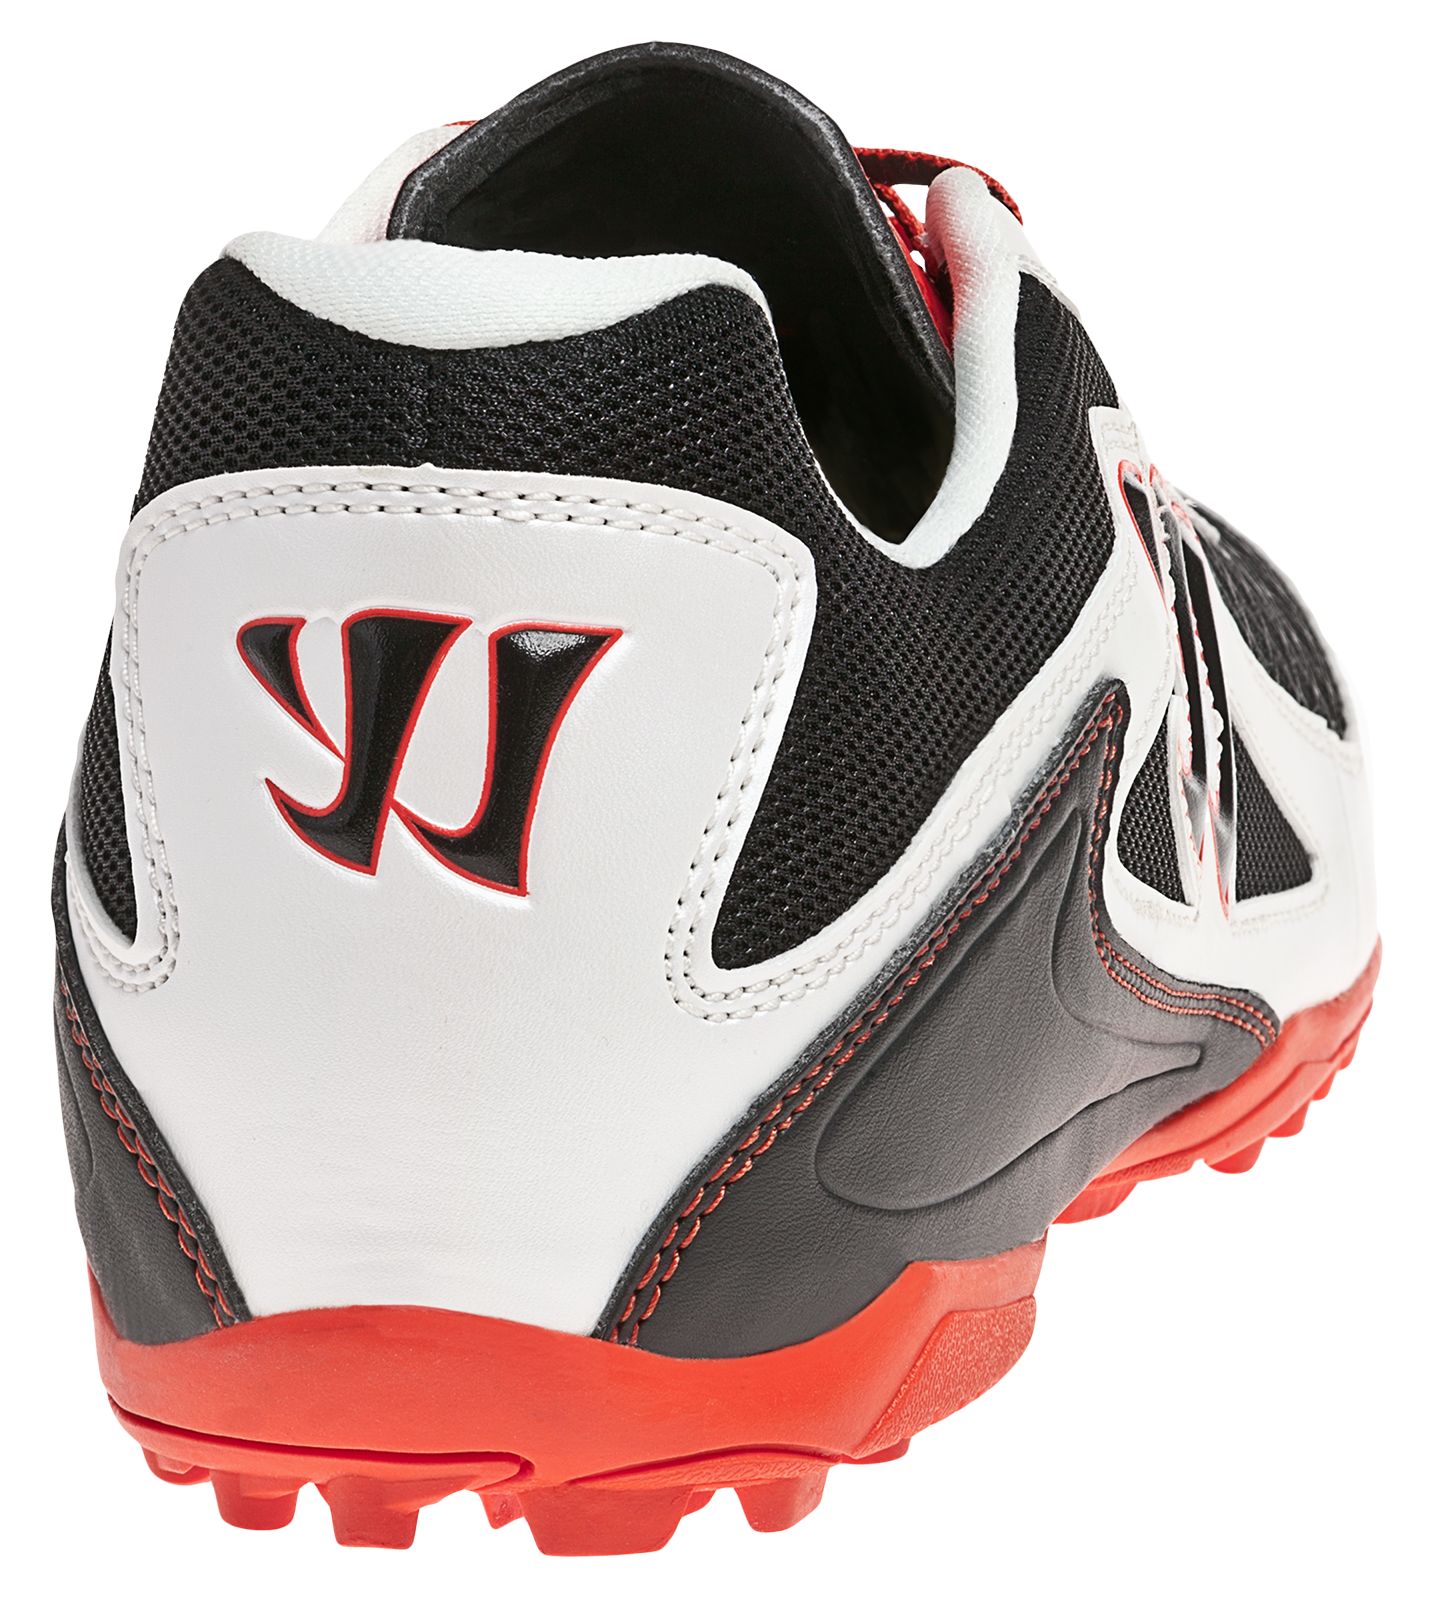 Blitz Low Profile Turf, Black with Pearlized White & Red image number 4